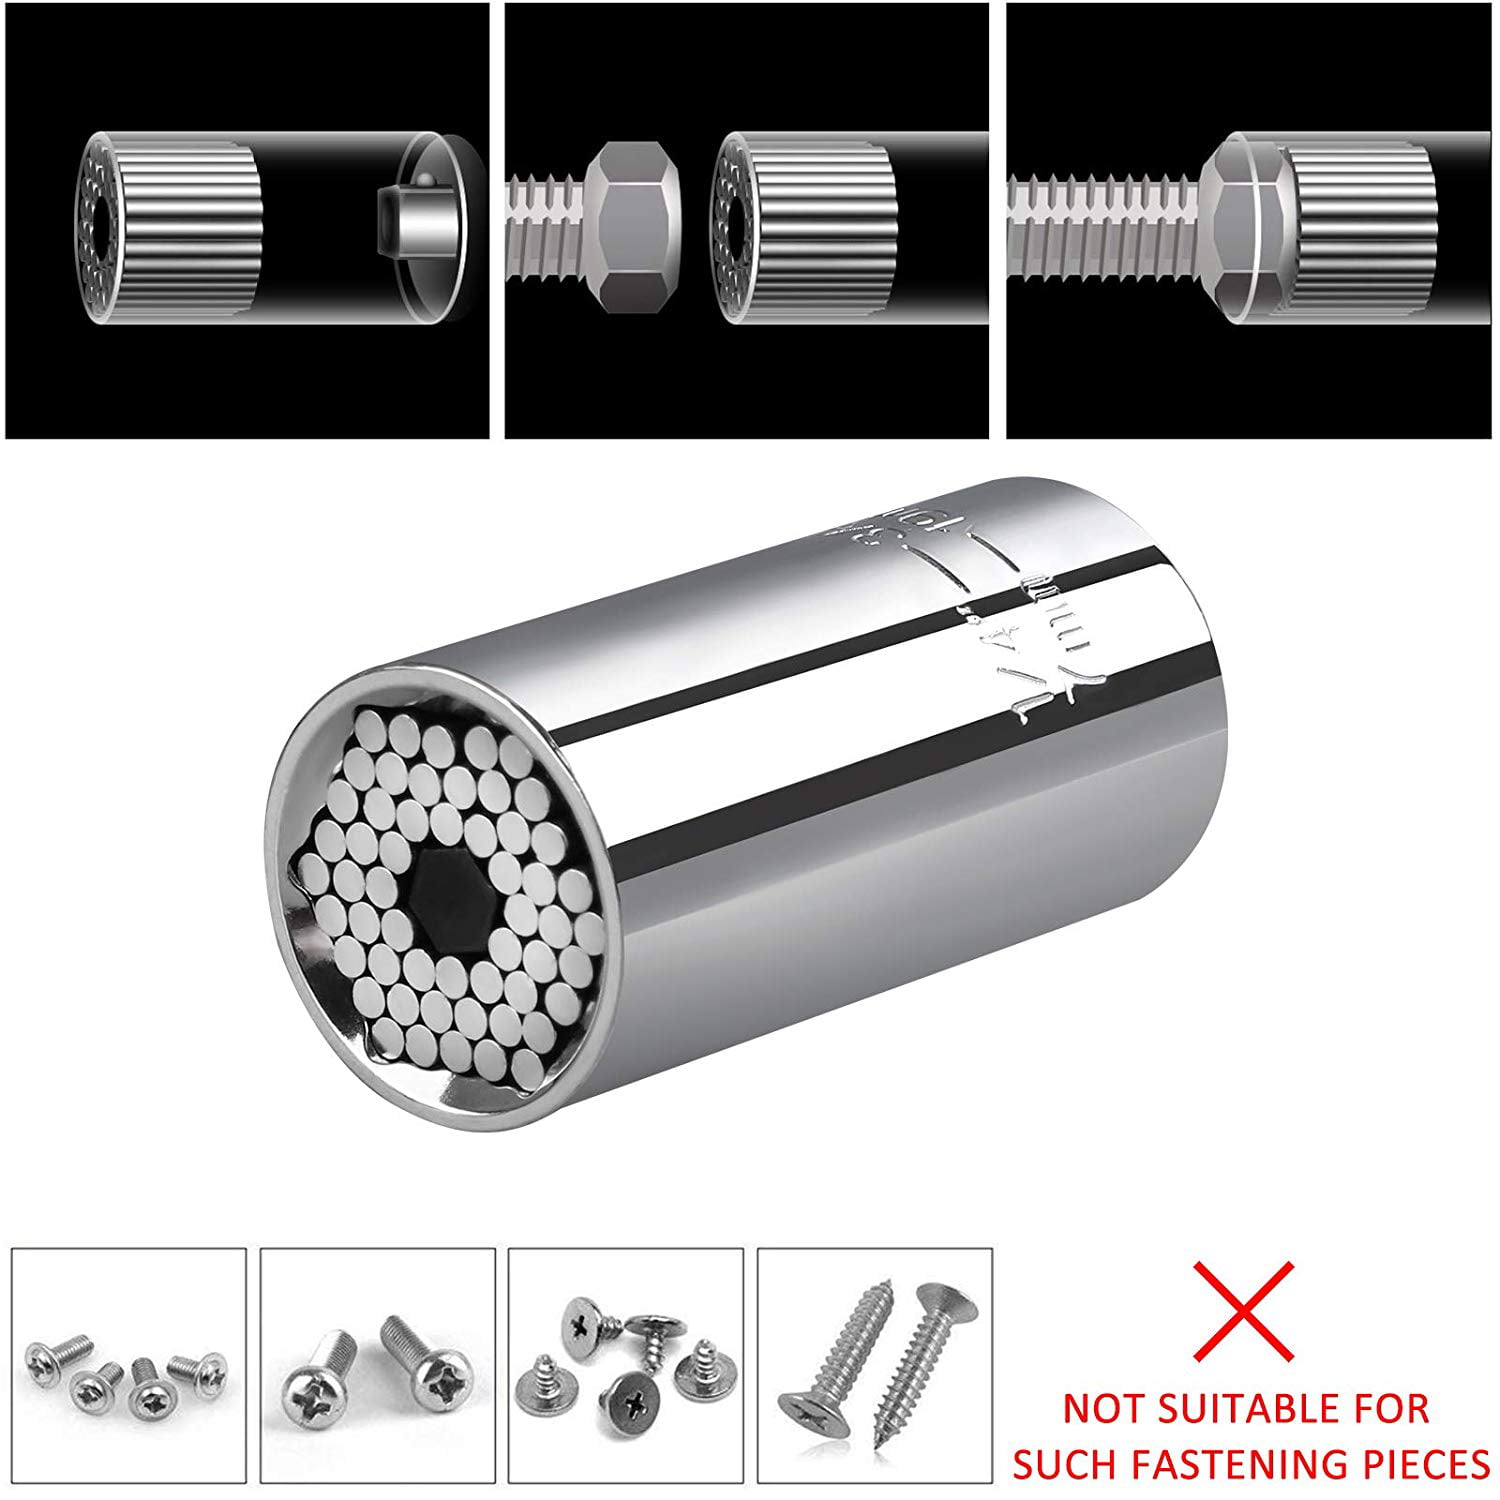 7mm-19mm Professional Repair Tools Gifts for Fathers Day Husband DIY Handyman Universal Socket Grip Adapter Universal Repair Tools Socket Set Ratchet Wrench Power Drill Adapter 1/4-3/4